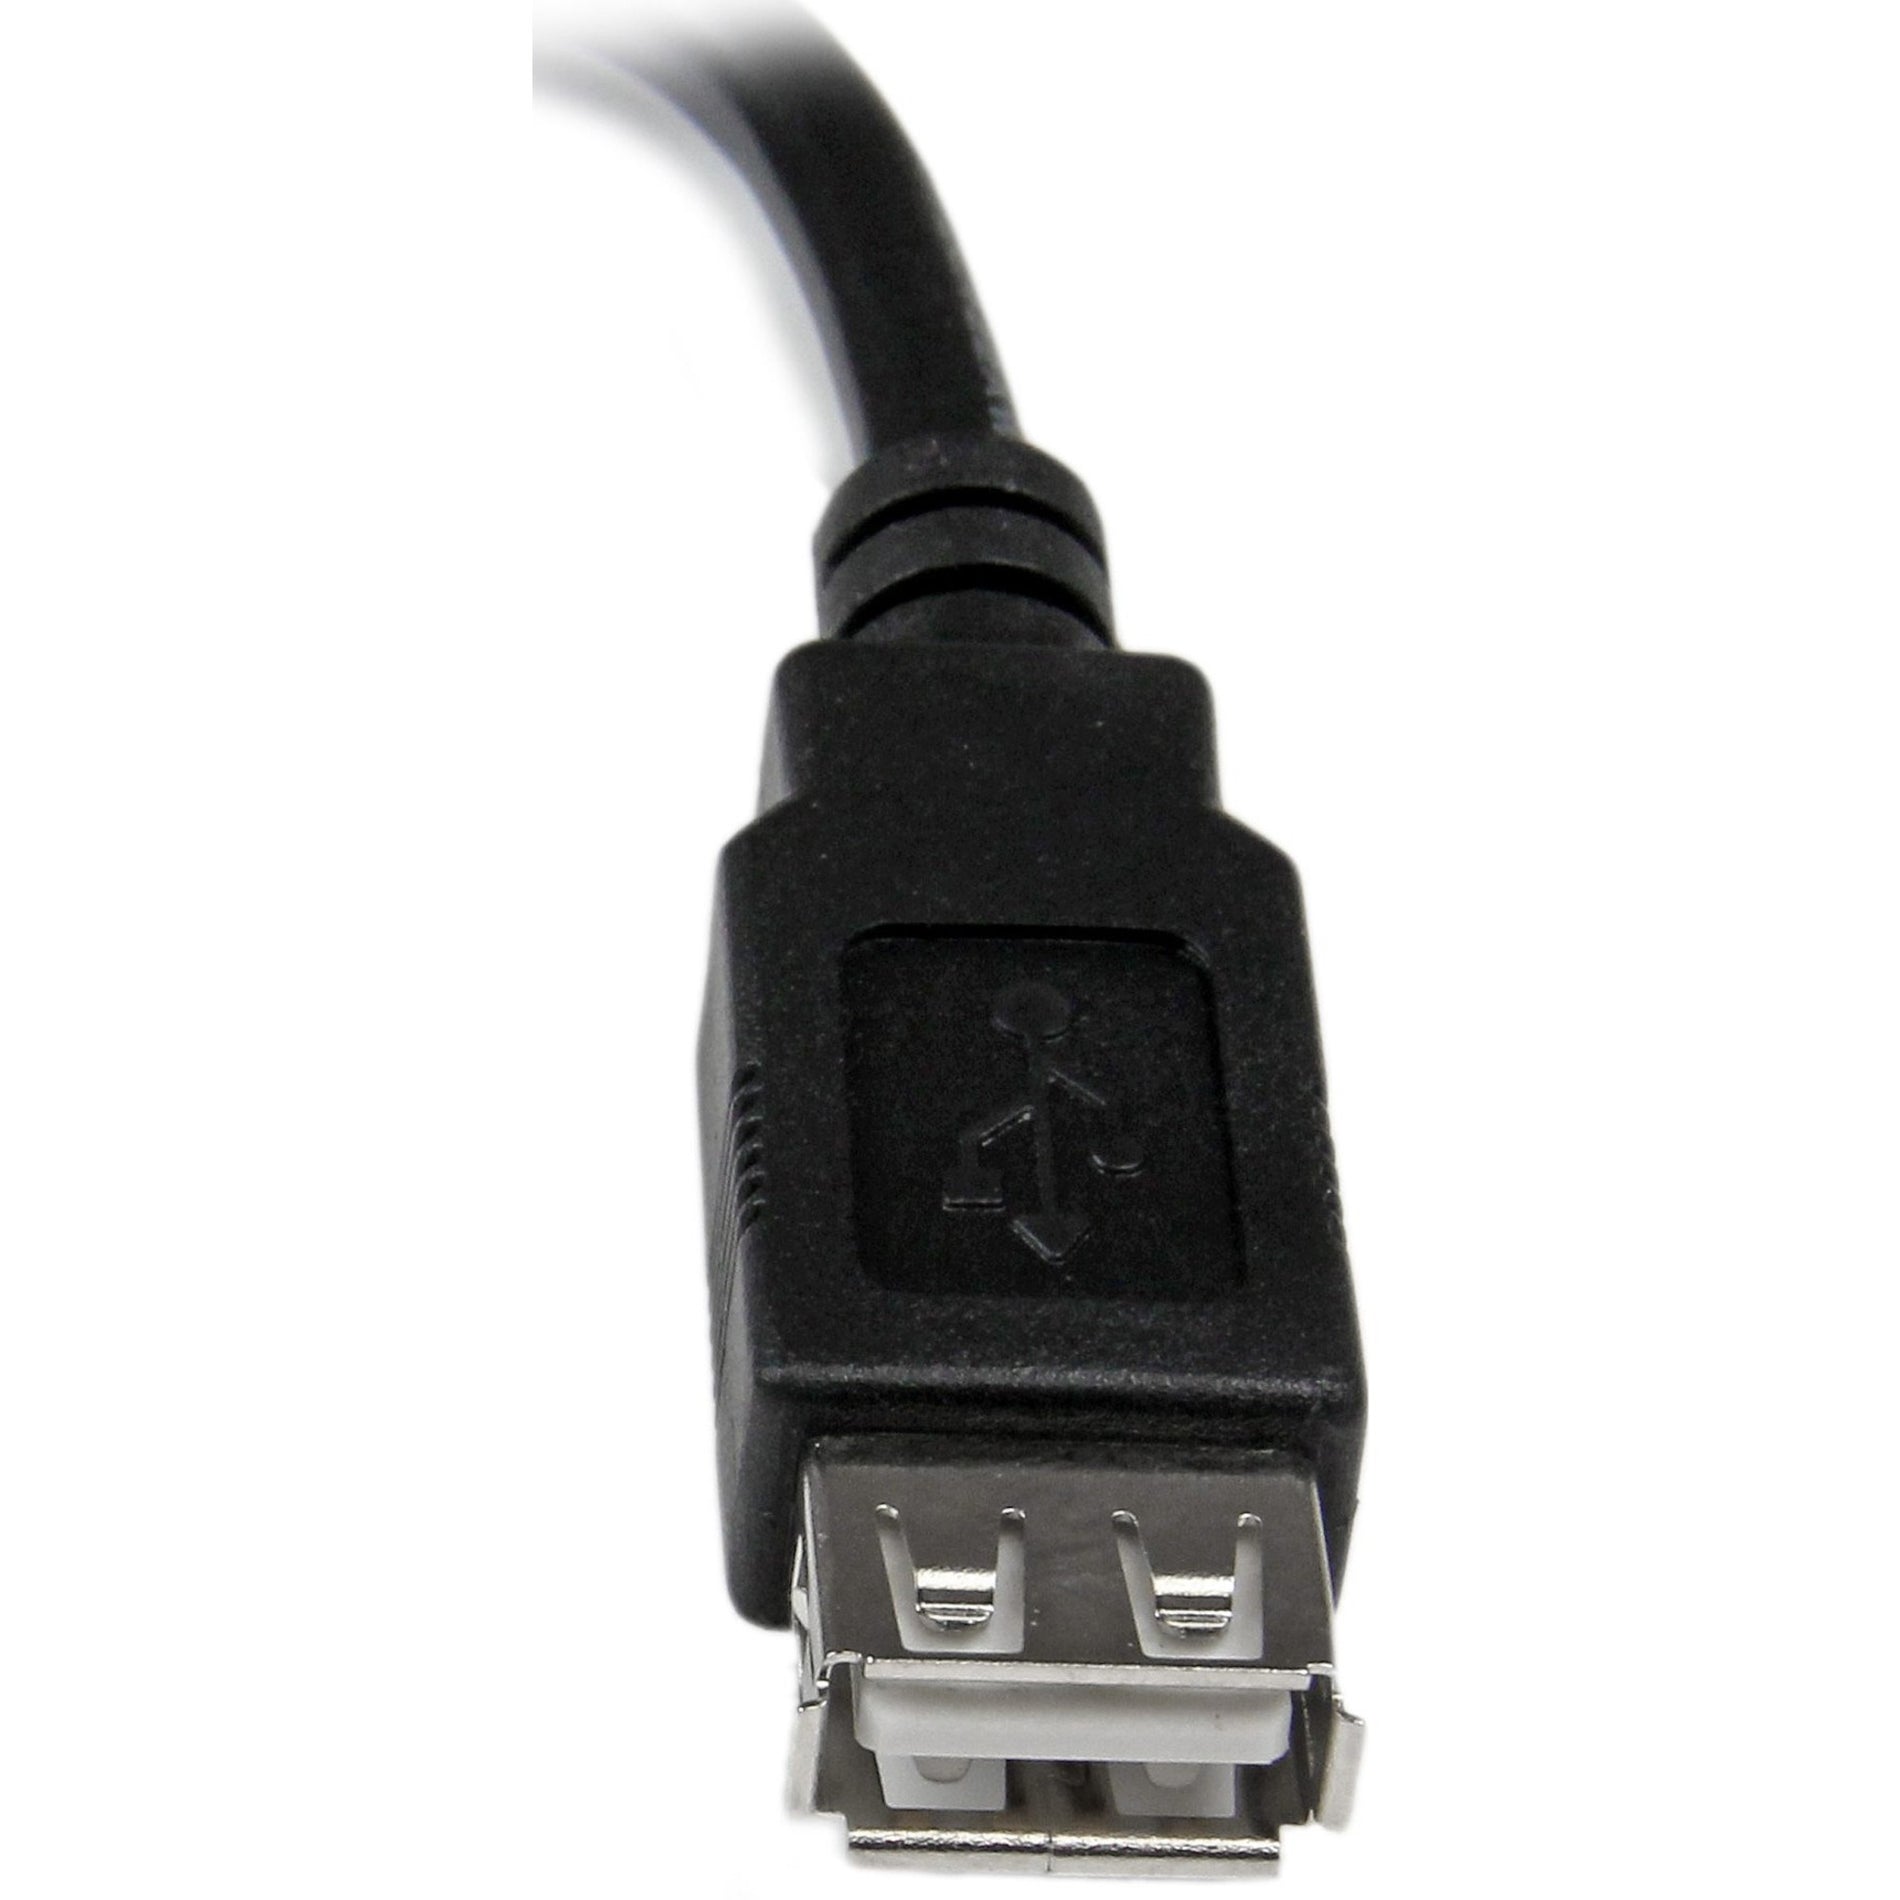 StarTech.com USBEXTAA6IN 6in USB 2.0 Extension Adapter Cable A to A - M/F, Data Transfer Cable